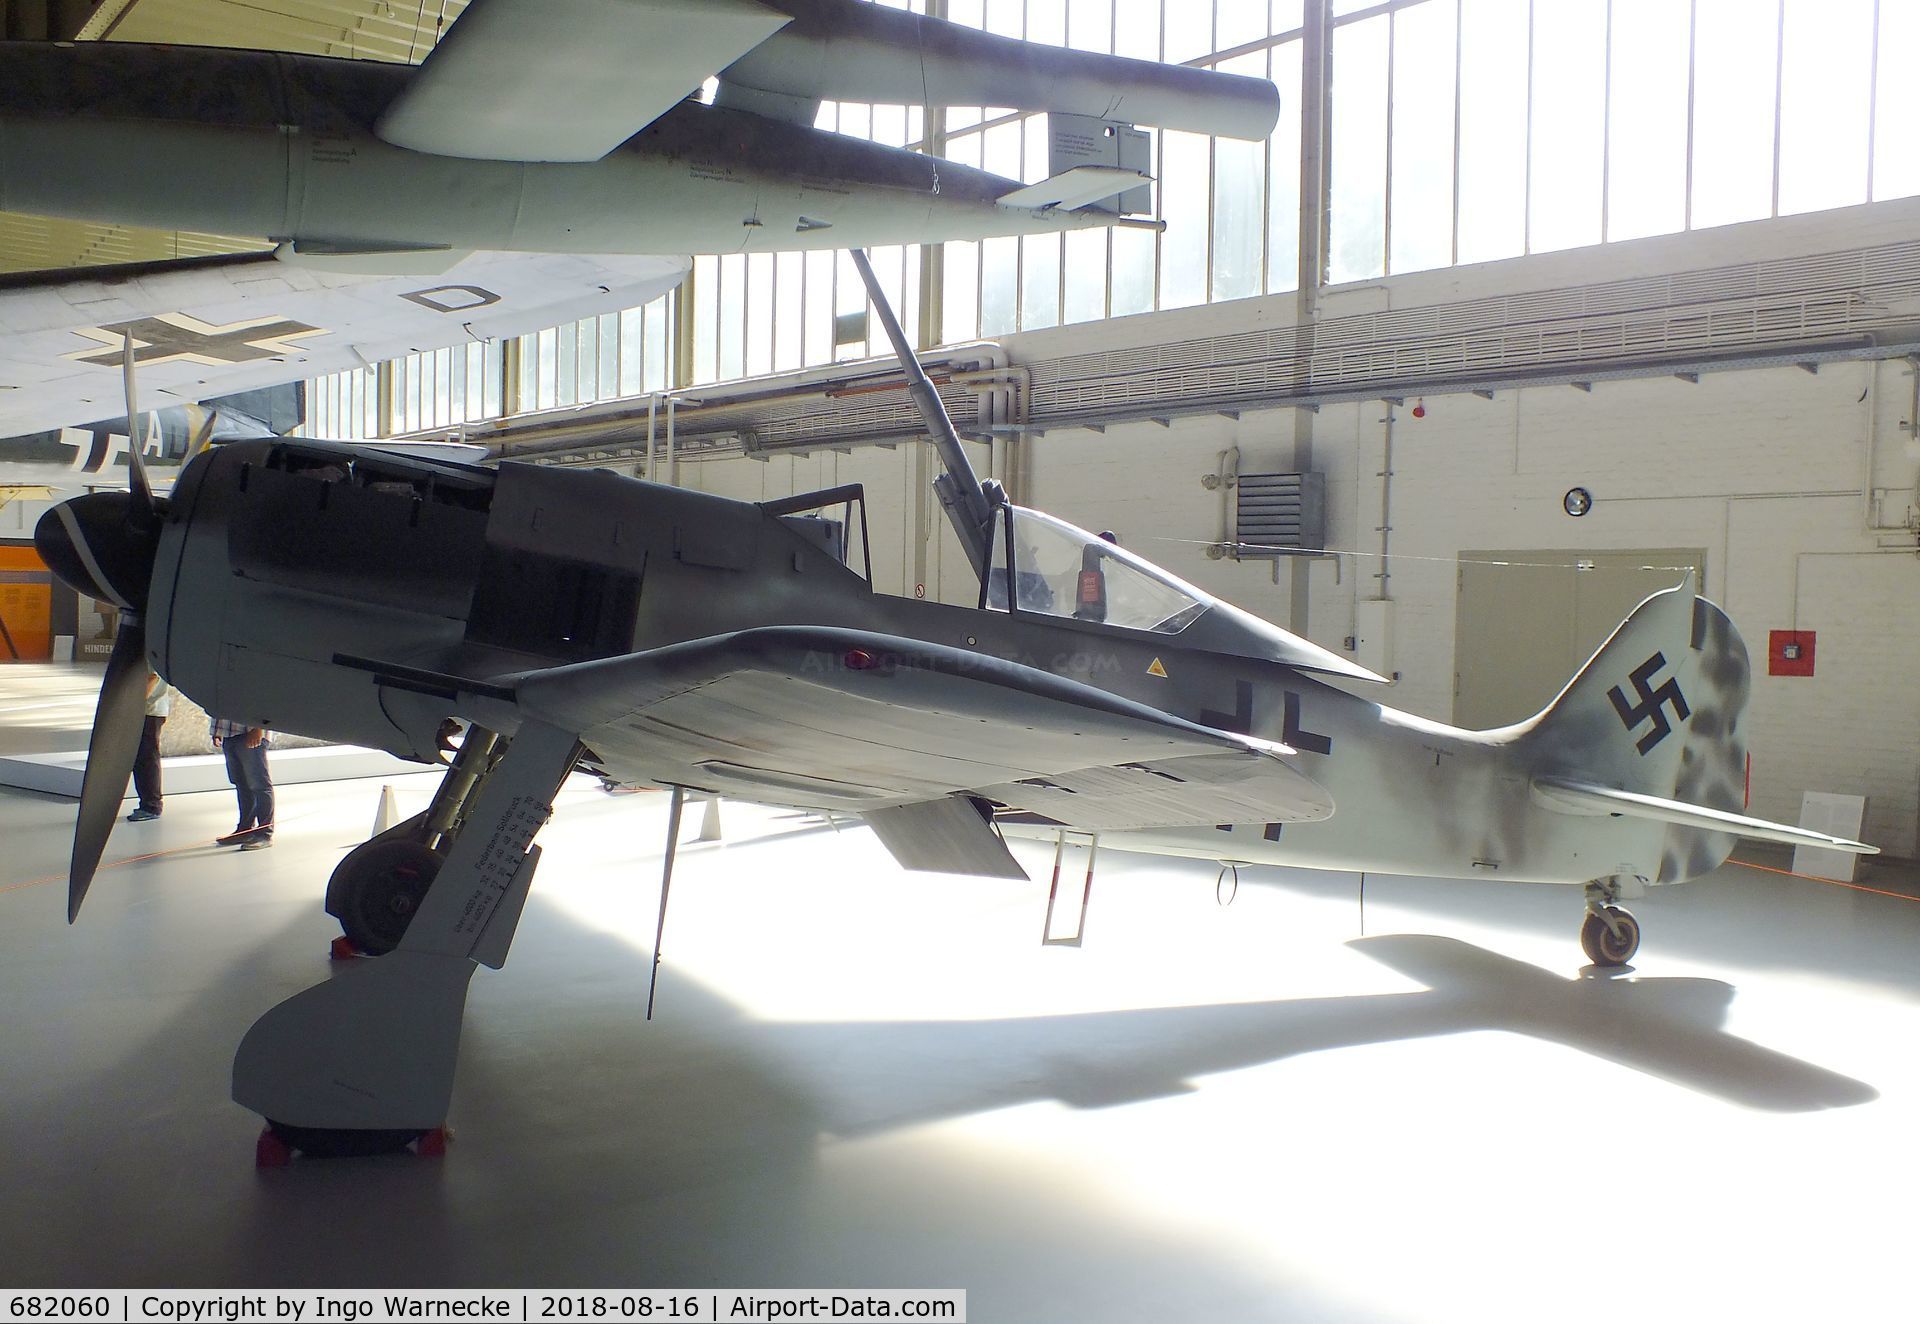 682060, Focke-Wulf Fw-190A-8 C/N 682060, Focke-Wulf Fw 190A-8 (rebuilt mainly with parts of 682060) at the Luftwaffenmuseum (German Air Force museum), Berlin-Gatow